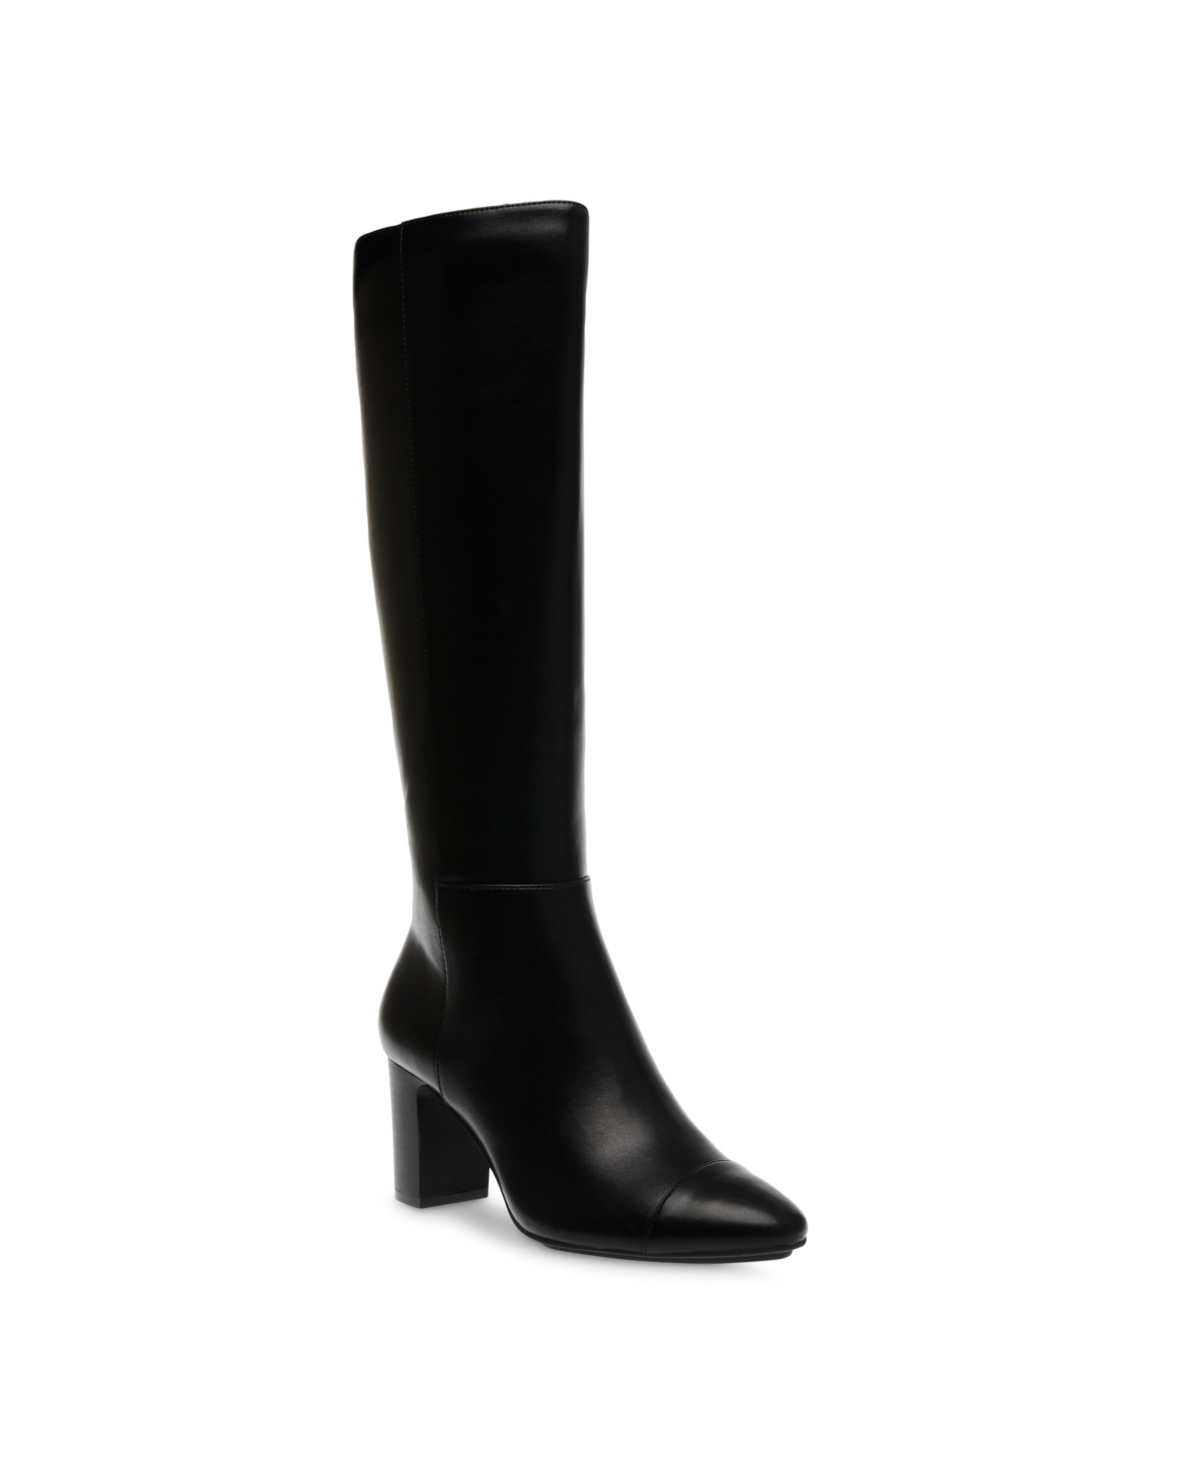 Women's Spencer Almond Toe Knee High Wide Calf Boots - Black Smooth